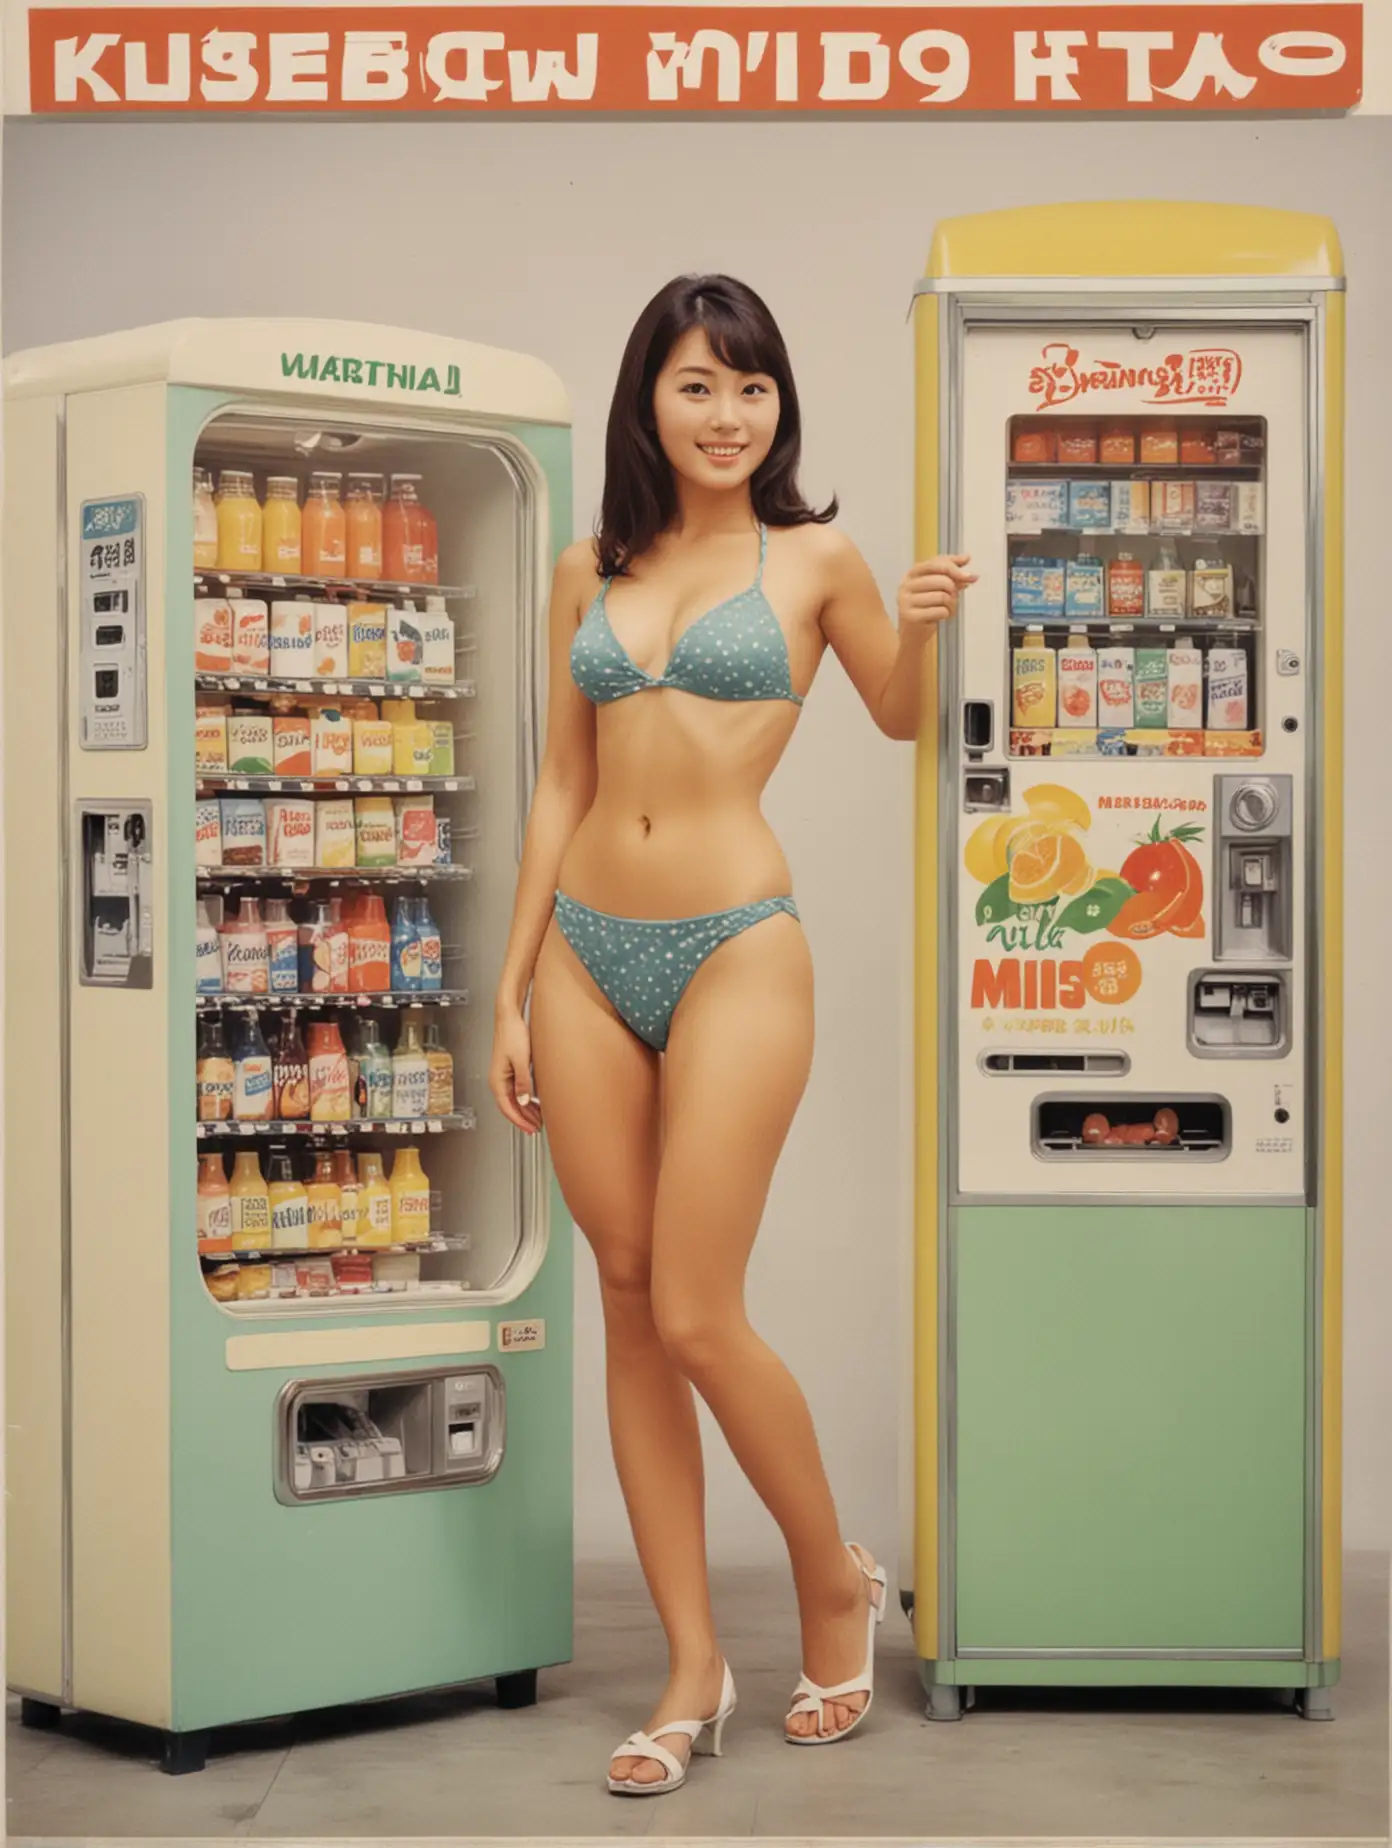 1960s japanese advert with a young woman in a bikini, she is standing in front of a fruits-milk vending machine, advert with text titles and company logos, patina slightly worn